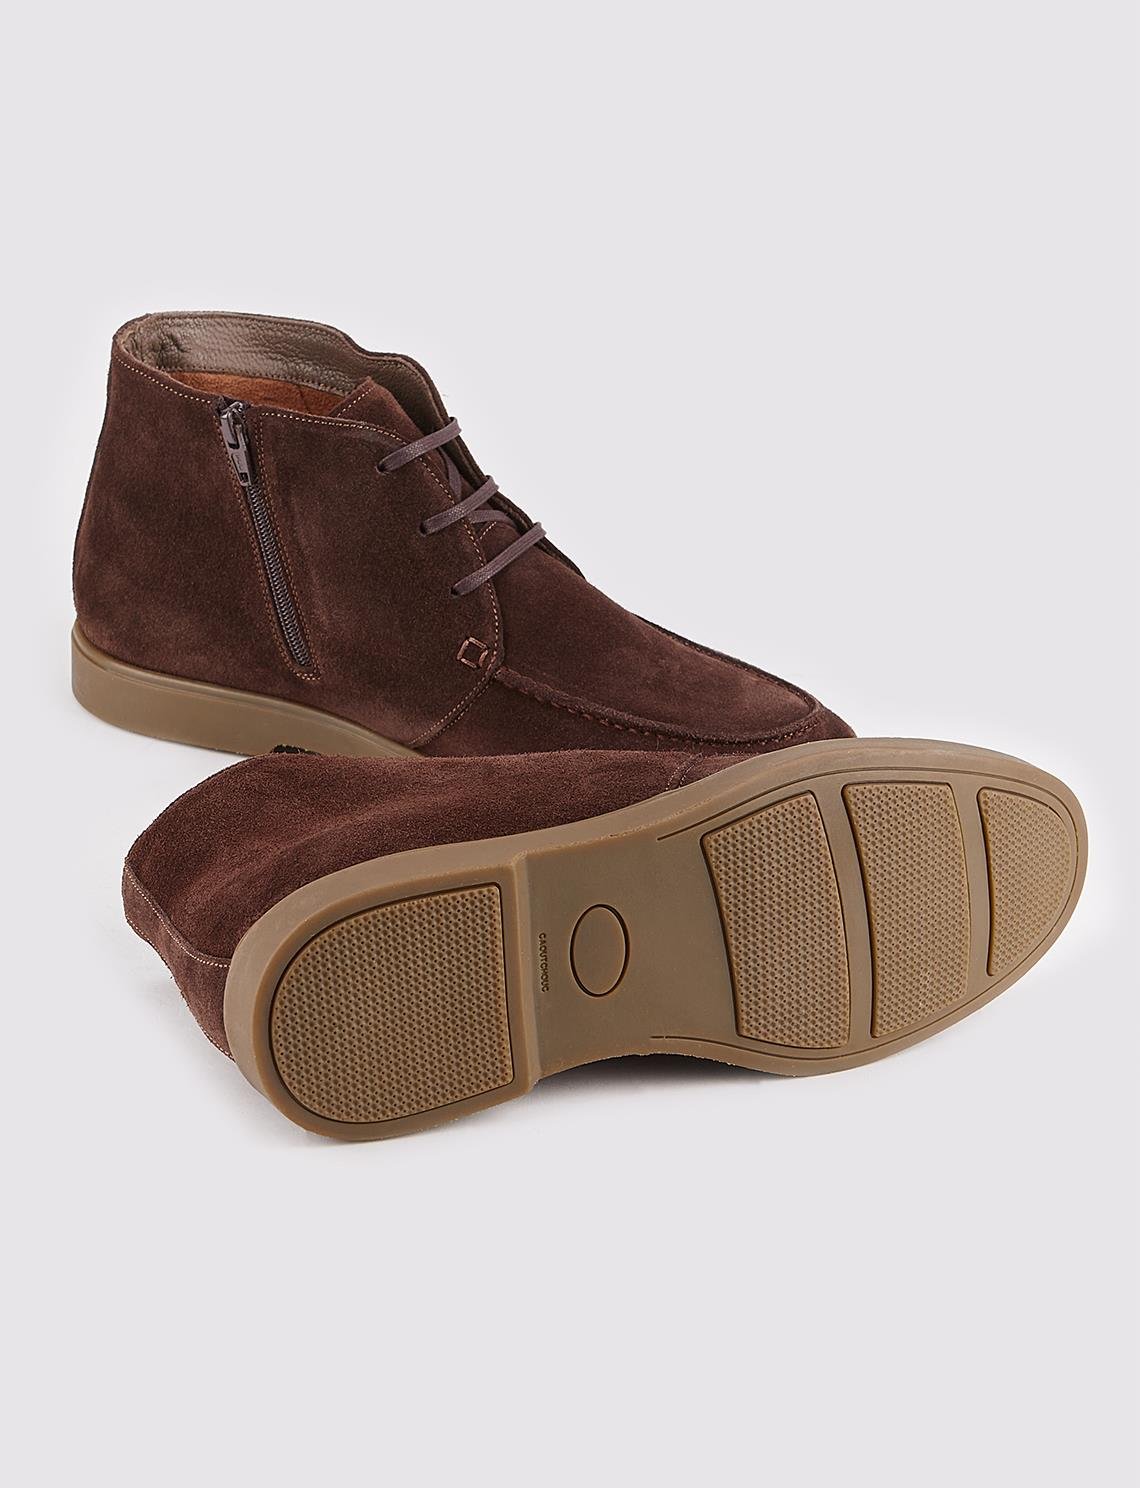 Brown leather chukka boots